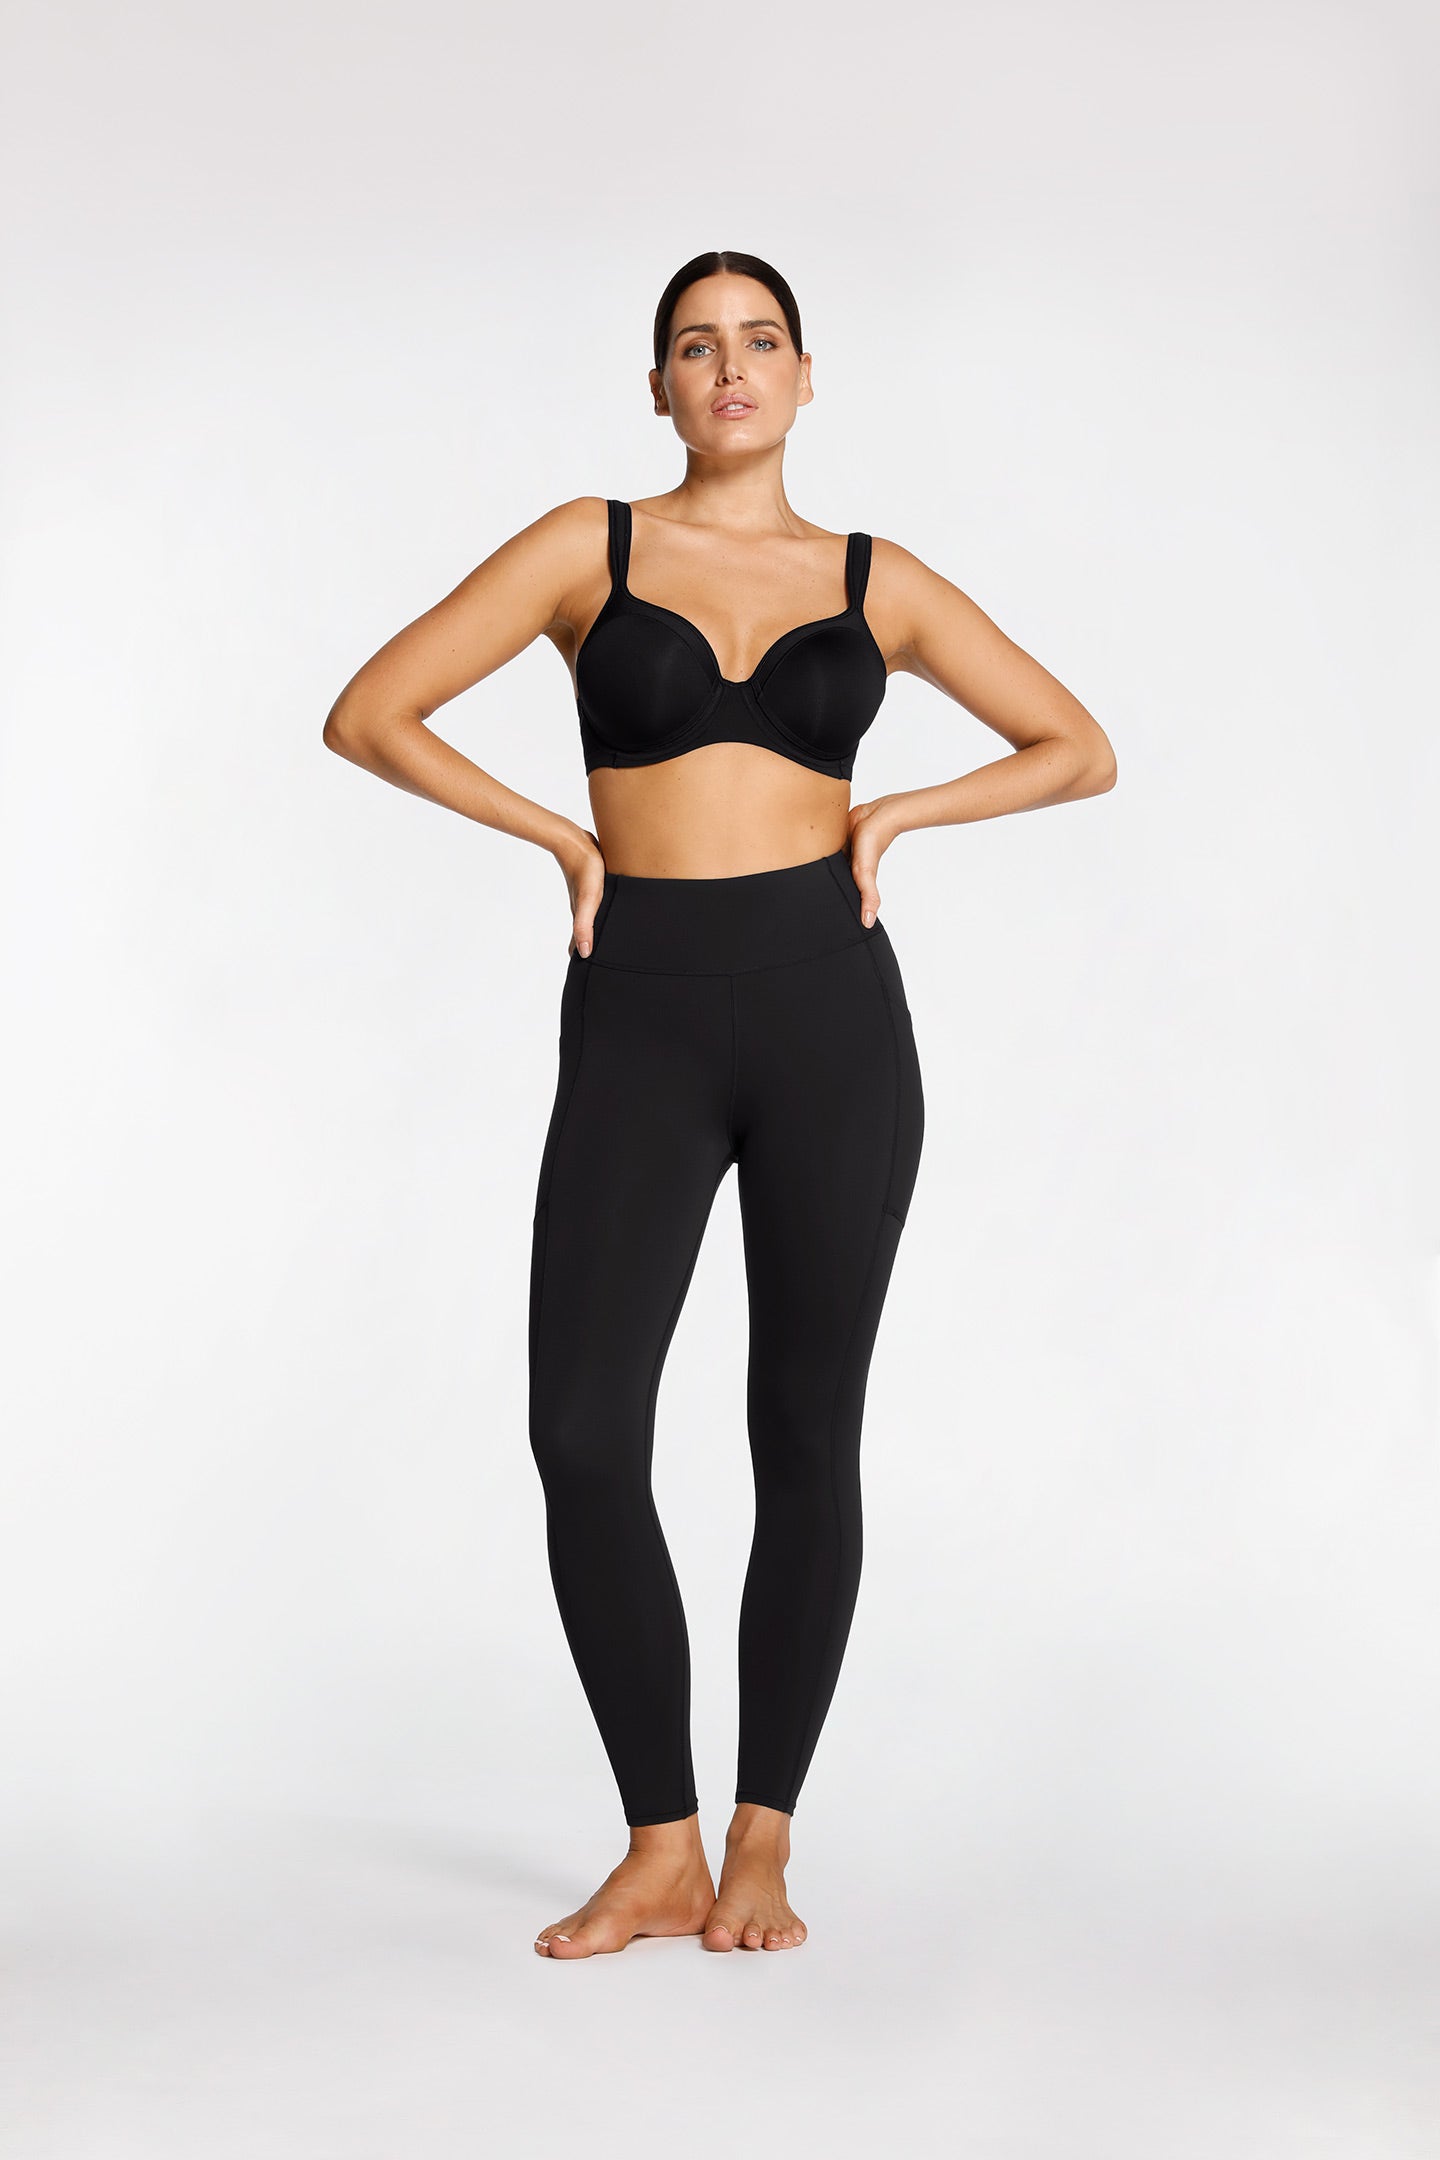 Buy ACTIVE CONTOUR BRA online at Intimo